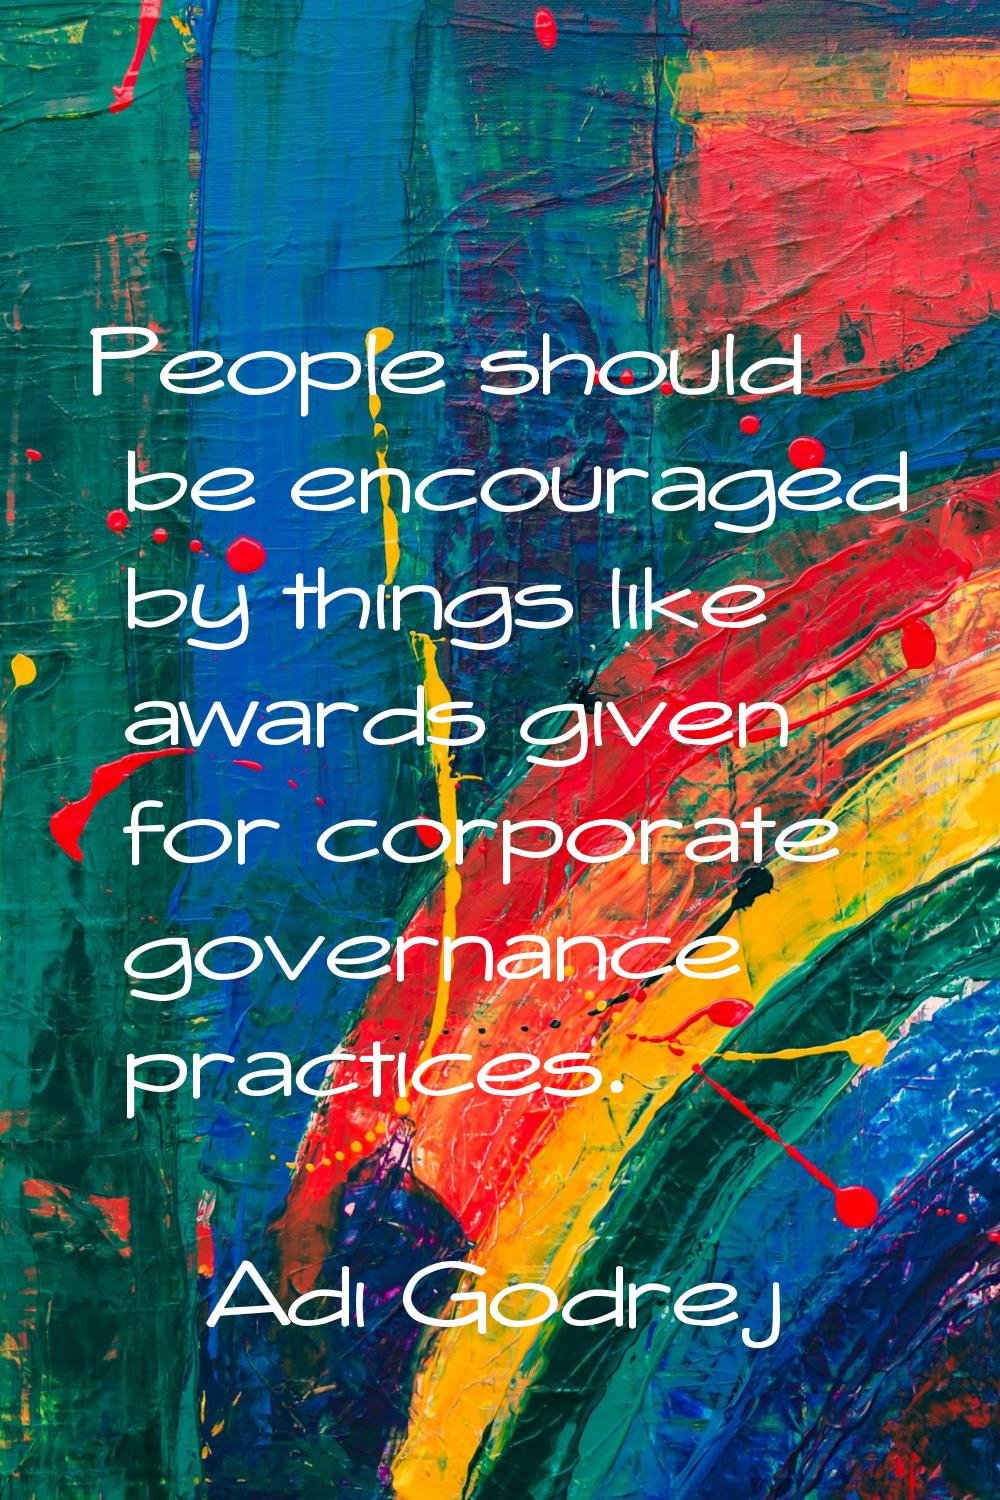 People should be encouraged by things like awards given for corporate governance practices.